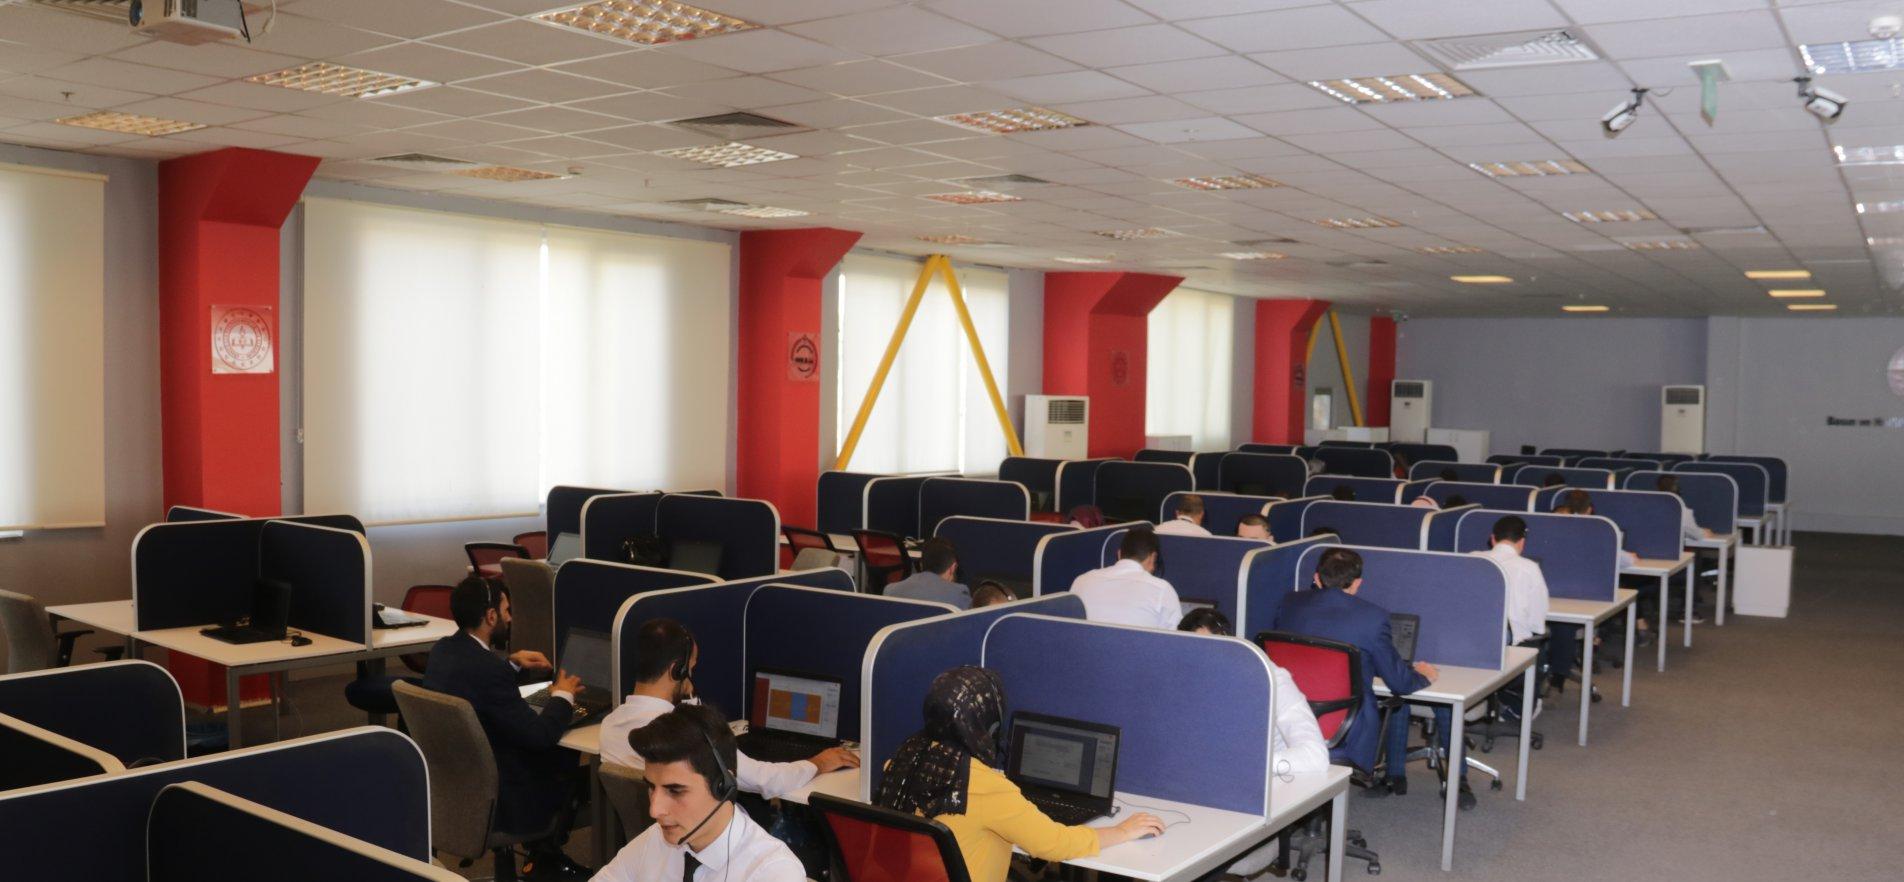 COVID-19 PANDEMIC MANAGEMENT SUPPORT CENTER AFFILIATED TO MEBİM IS SET UP  TO SUPPORT SCHOOLS